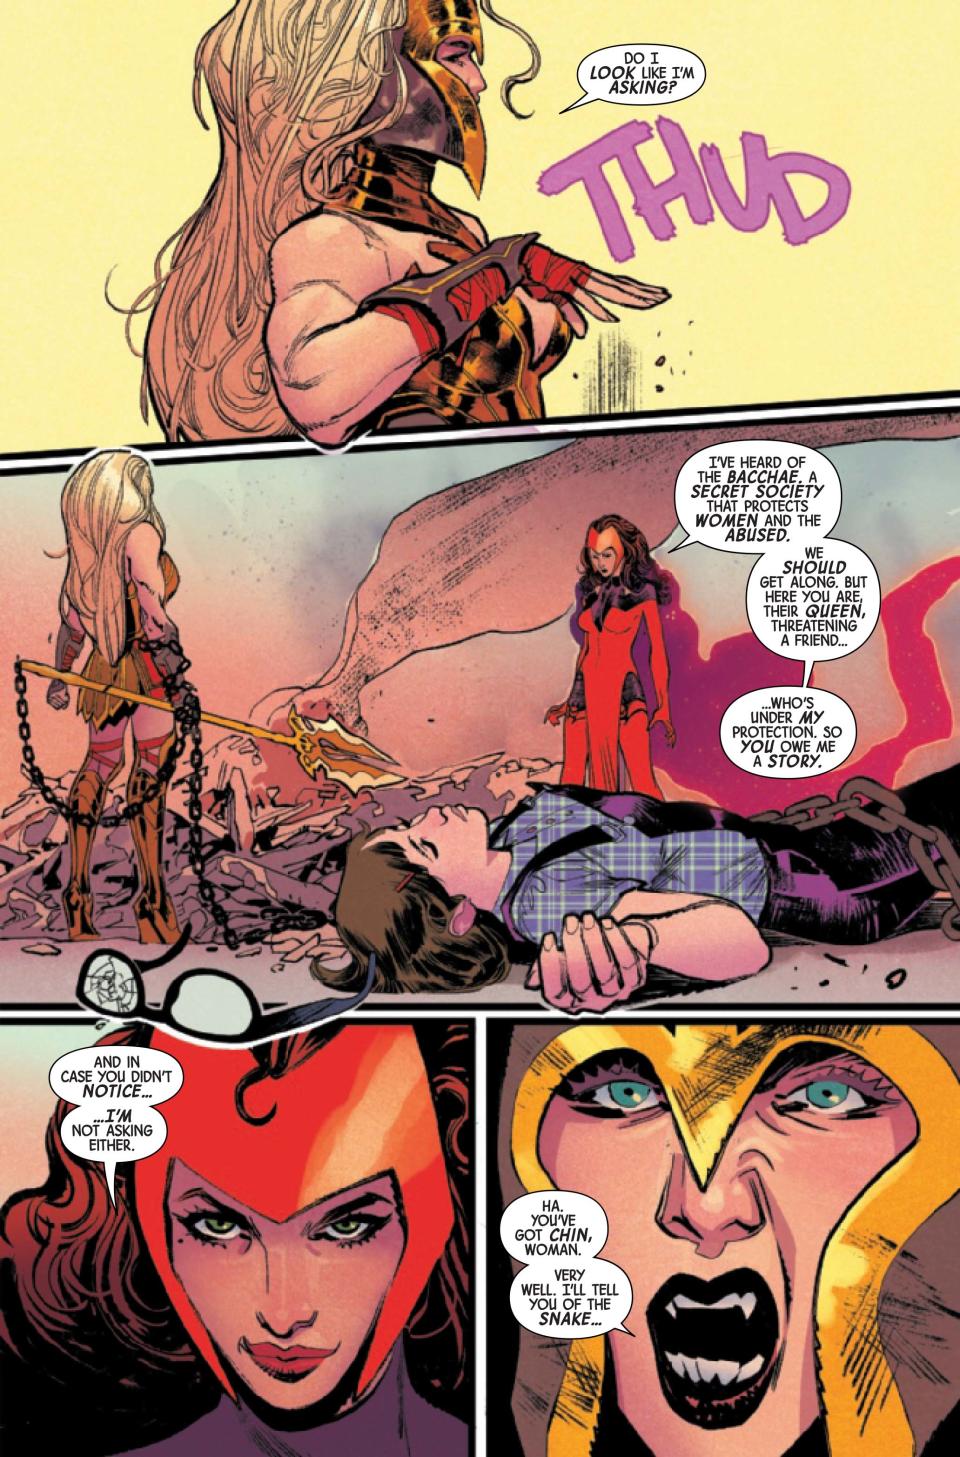 Scarlet Witch faces off against Scythia.